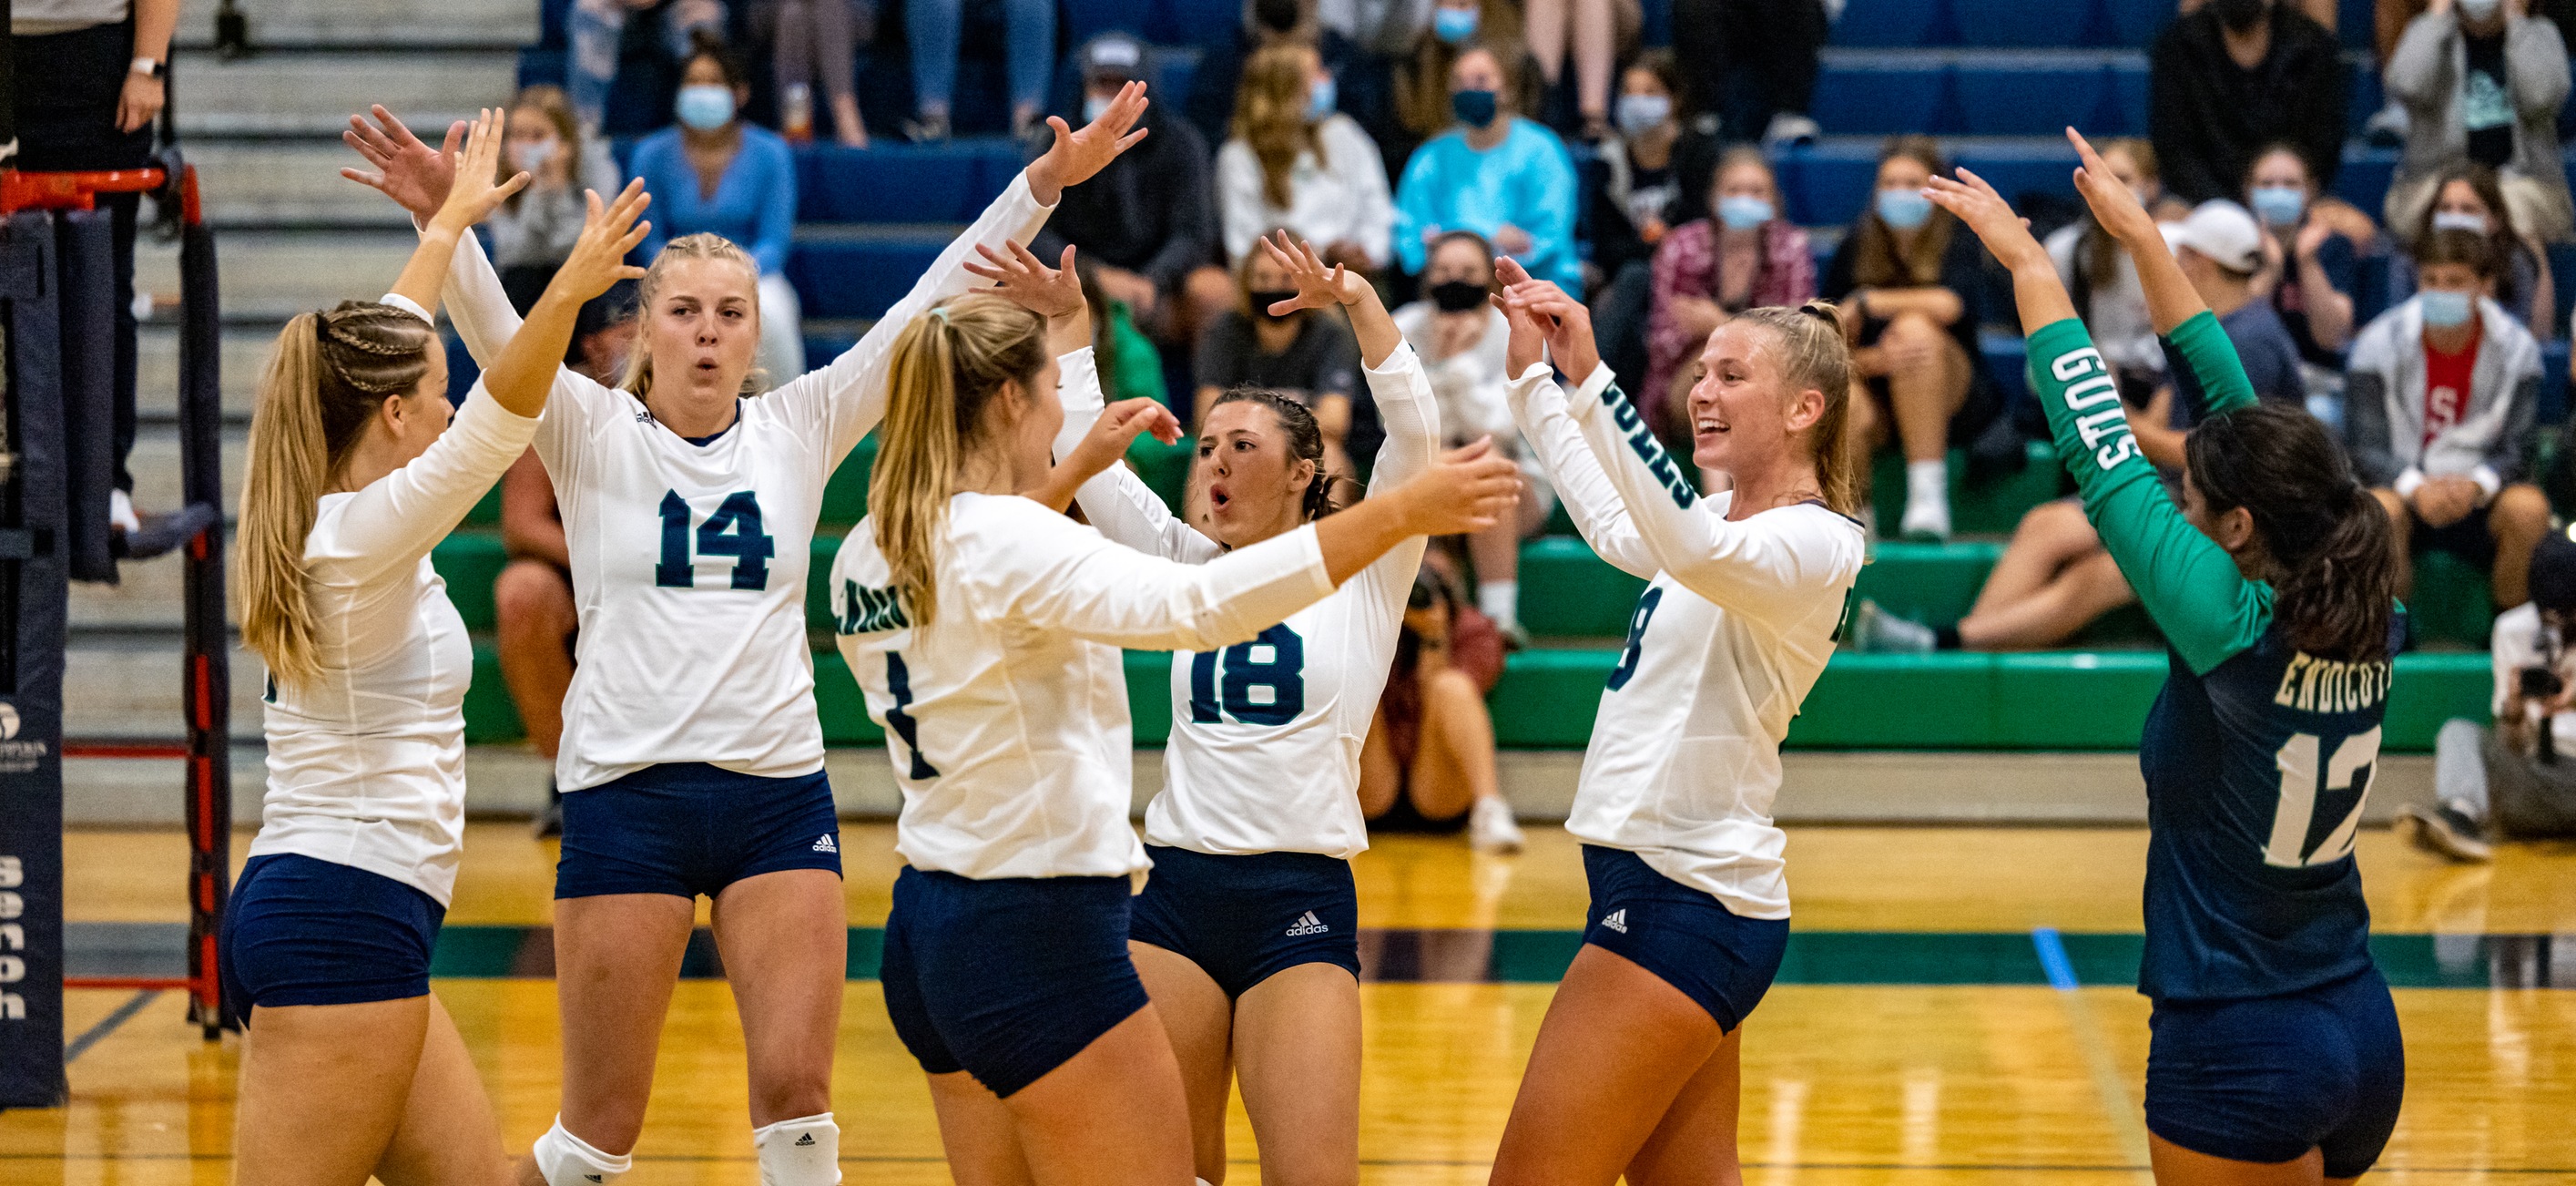 The Endicott women's volleyball team celebrates a block in the team's sweep of USM to open the 2021 season.